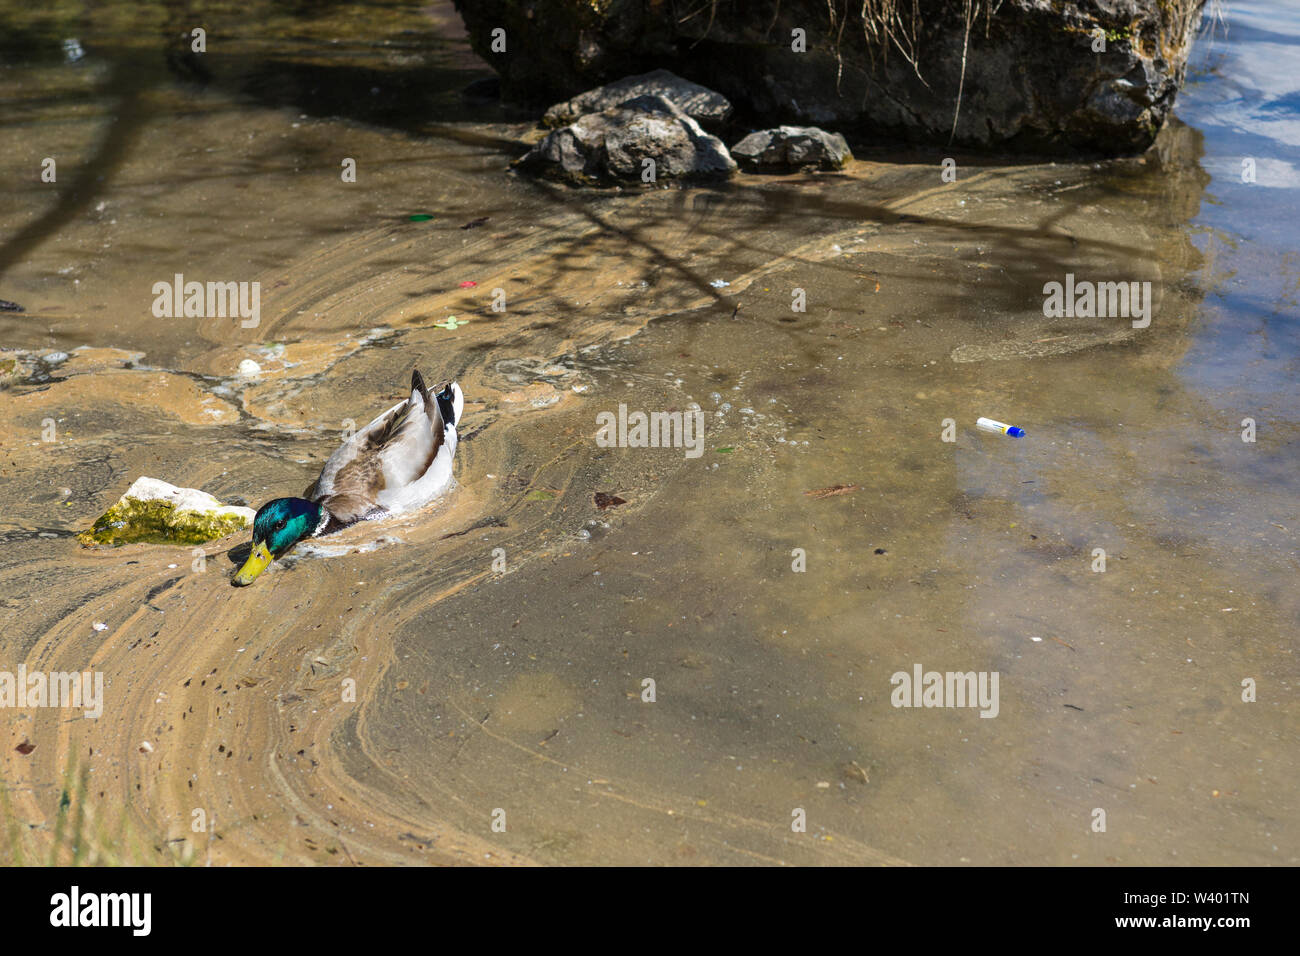 Environmental Awareness: Plastic floating on a mucky lake shore next to a duck looking for food Stock Photo